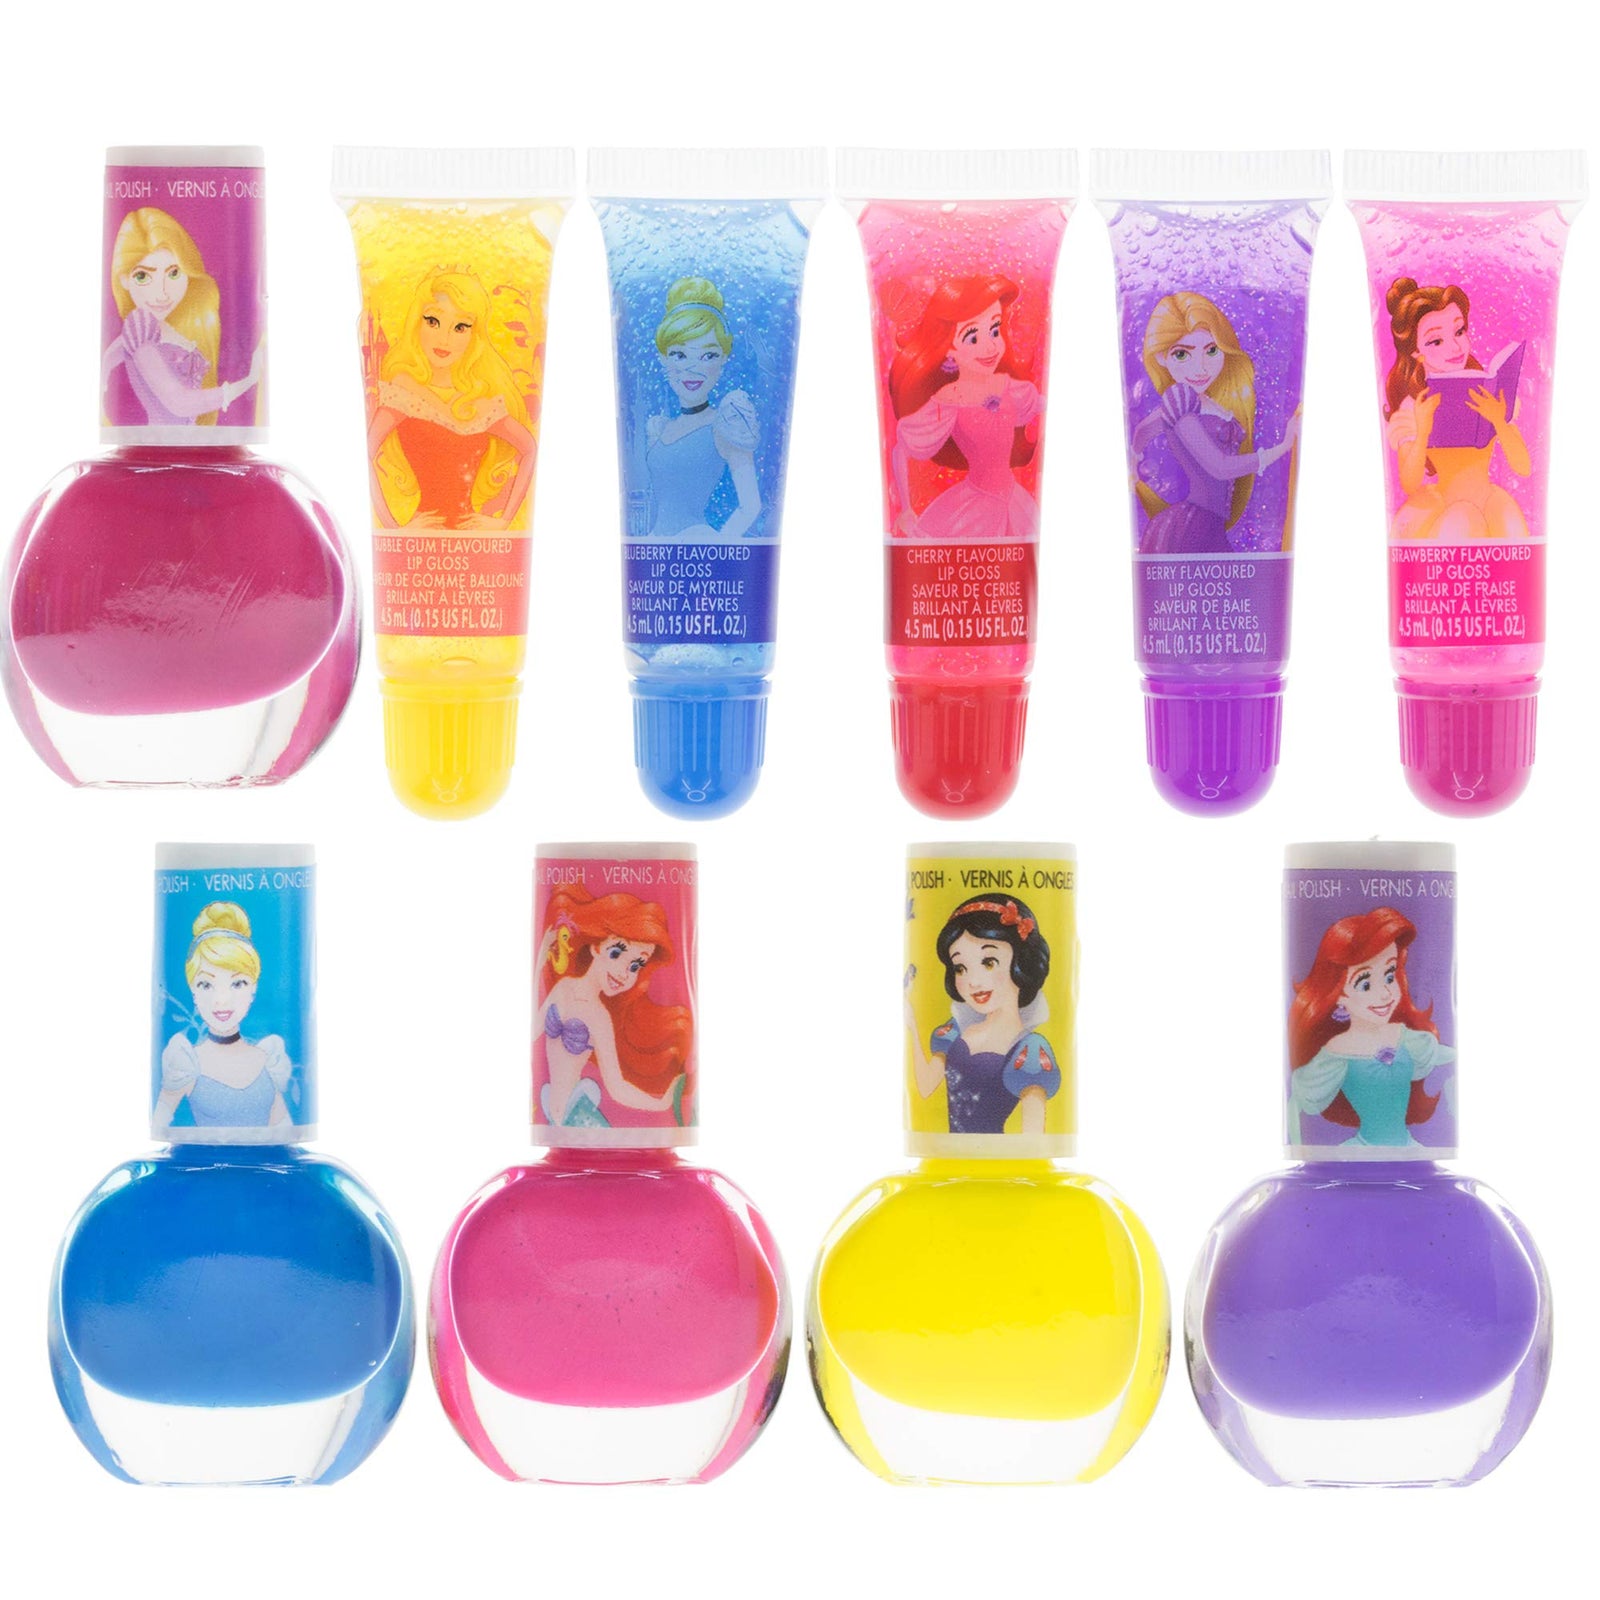 Disney Princess - Townley Girl Super Sparkly Cosmetic Makeup Set for Girls with Lip Gloss Nail Polish Nail Stickers - 11 Pcs|Perfect for Parties Sleepovers Makeovers| Birthday Gift for Girls 3 Yrs+